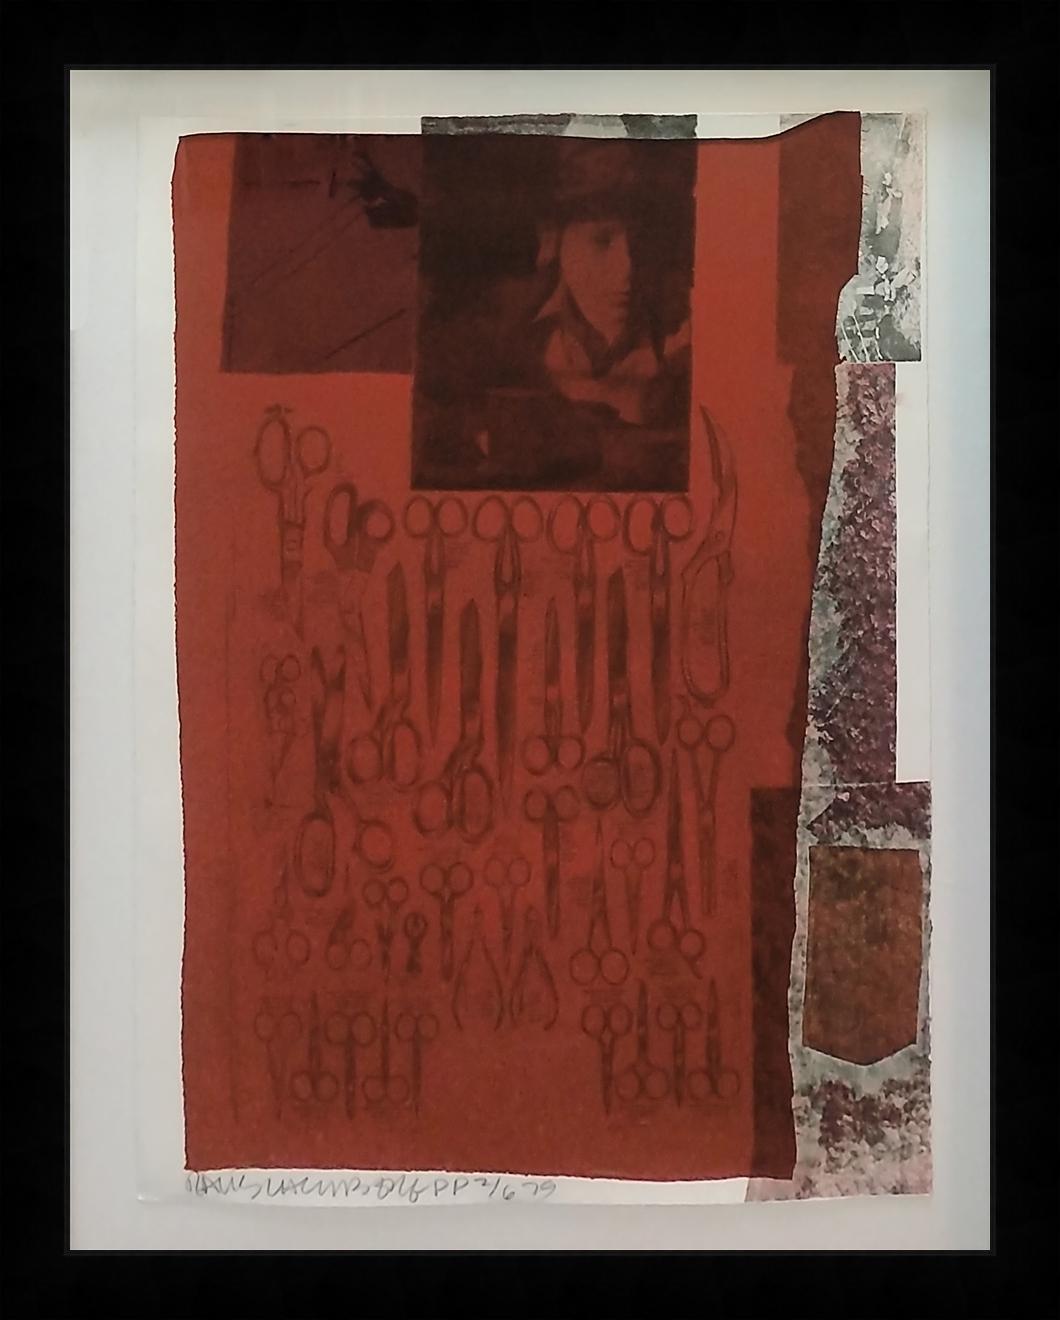 MOST DISTANT VISIBLE PART OF THE SEA - Print by Robert Rauschenberg